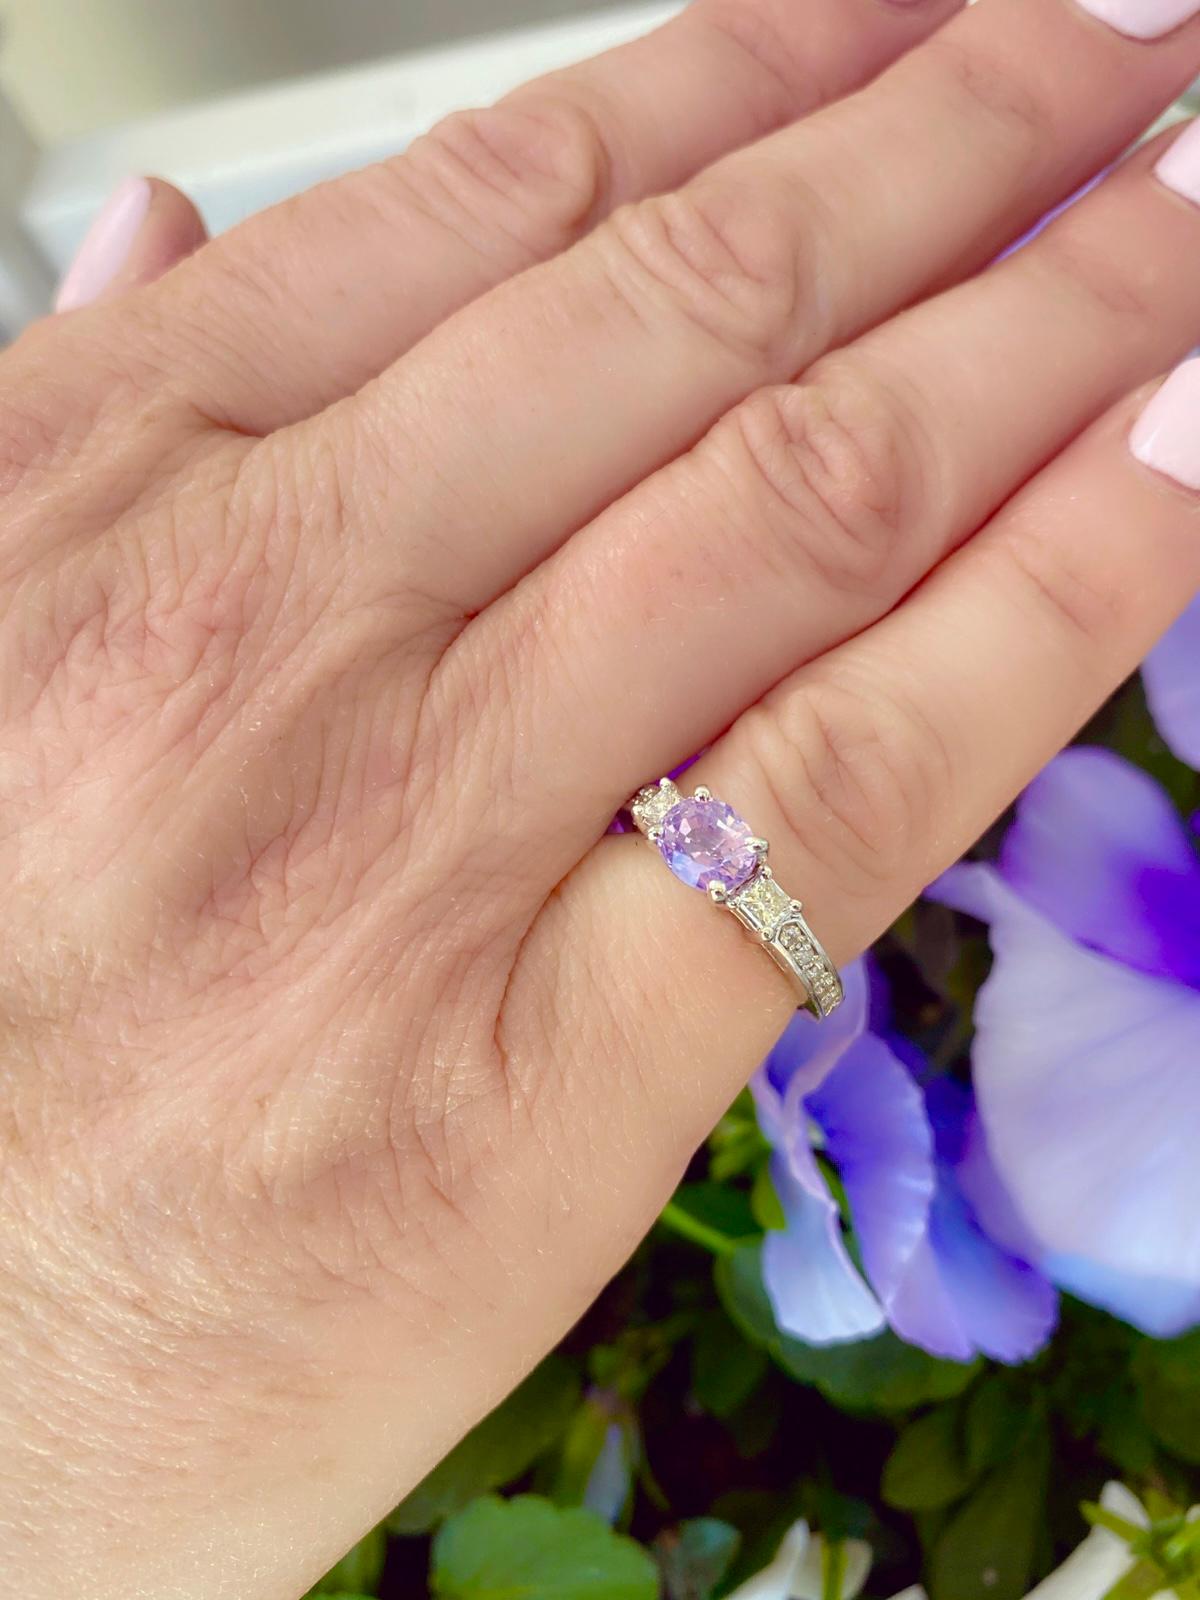 An extremely unique estate ring showcasing a remarkable center stone! The 14k white gold ring features a unique and vibrant purplish-pink oval-cut sapphire, weighing 1.37 carats, accented by 12 princess and round brilliant-cut diamonds weighing